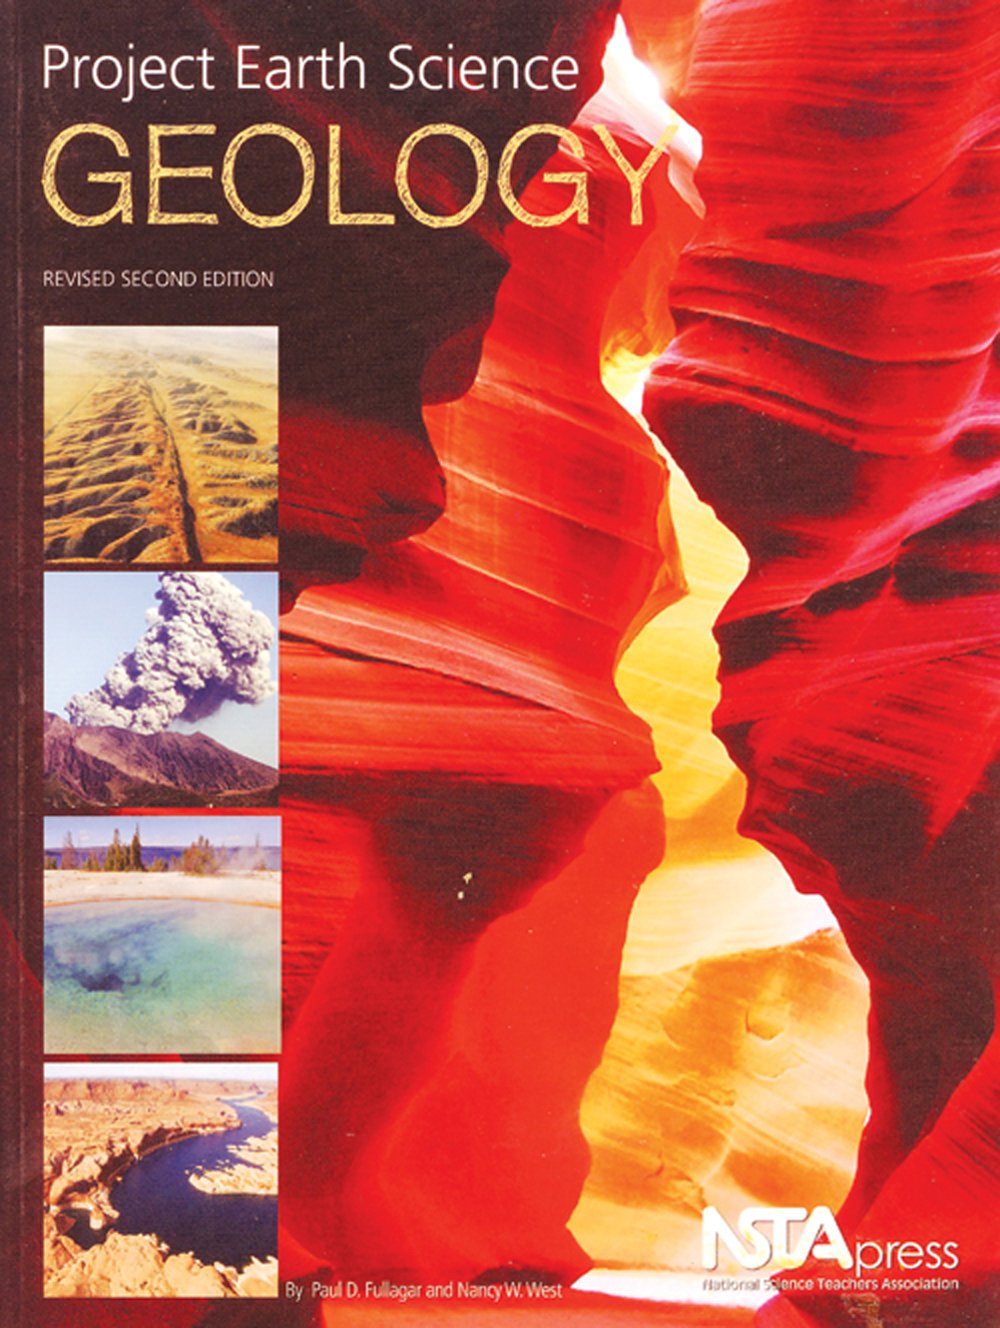 Project Earth Science: Geology (2nd Edition)